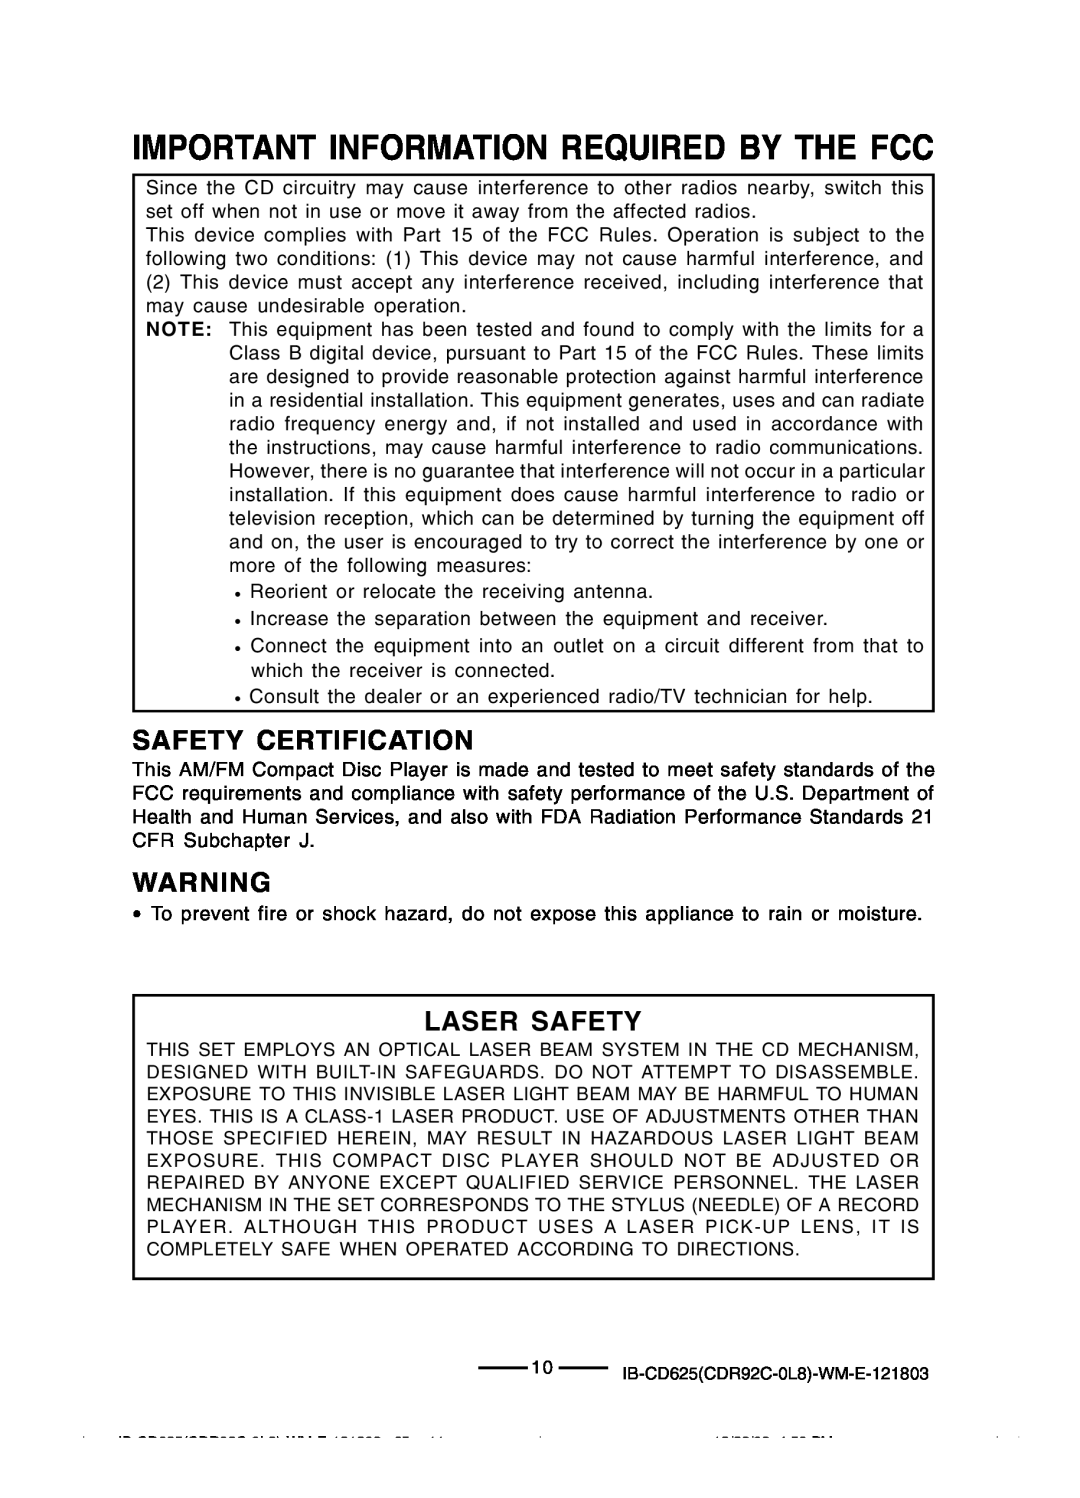 Lenoxx Electronics CD625 Important Information Required By The Fcc, Safety Certification, Laser Safety 